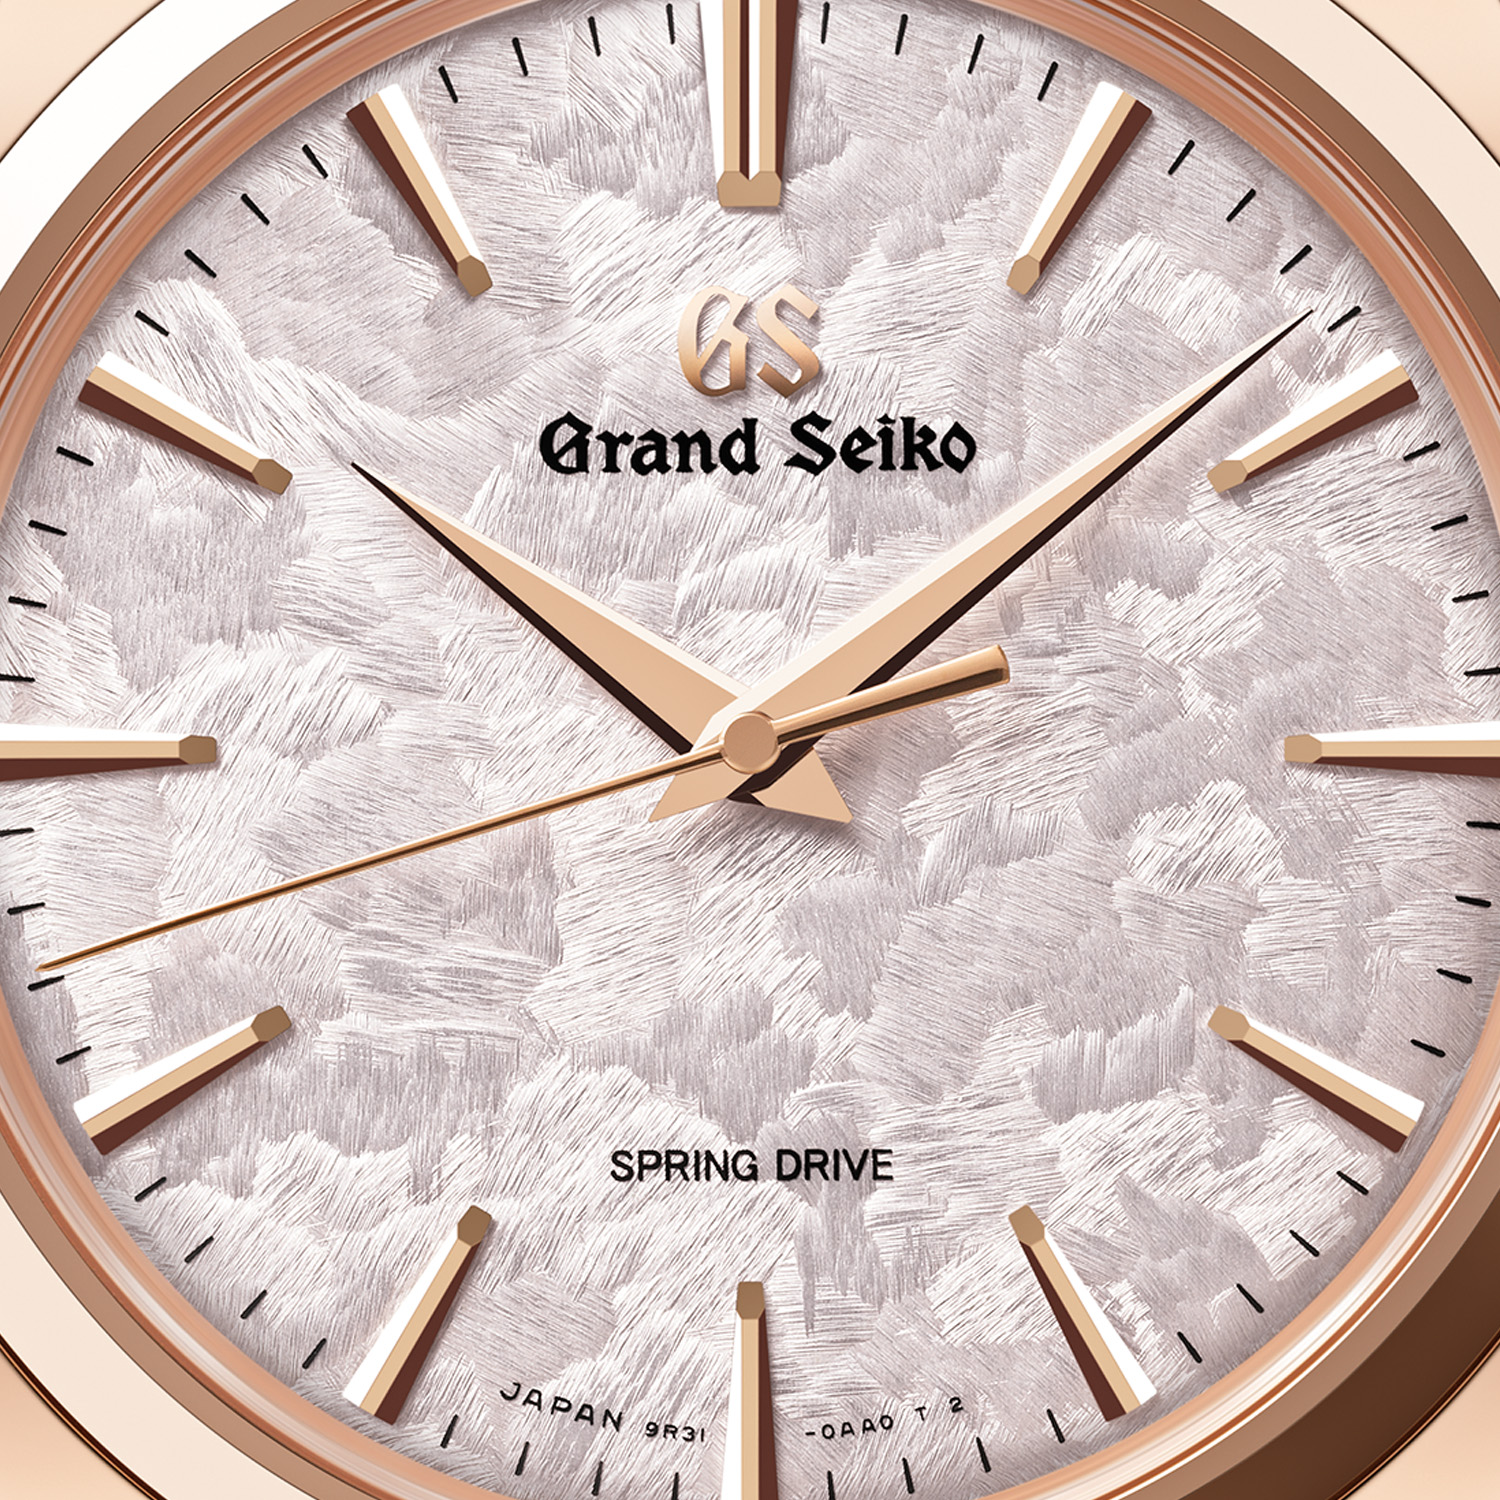 Grand Seiko 'Hana-Ikada' Spring Drive Limited Edition | Seiko Boutique |  The Official UK Online Store